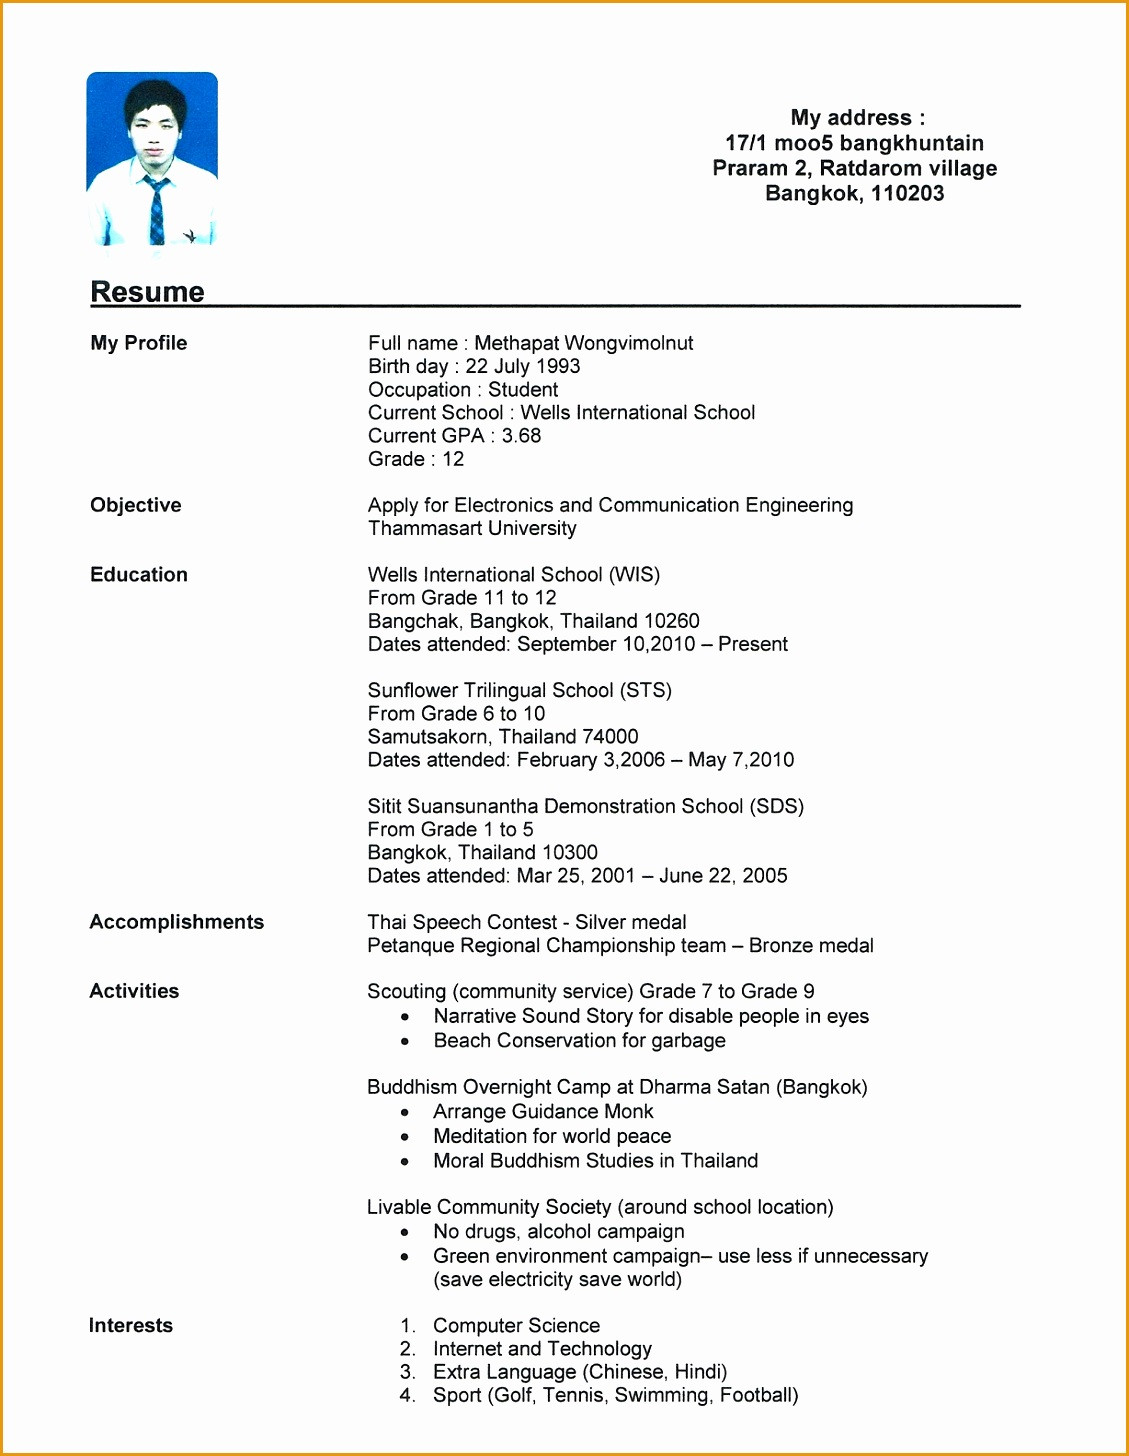 Sample Resume for Undergraduate Student with No Experience 6 Resume Templates College Student No Job Experience